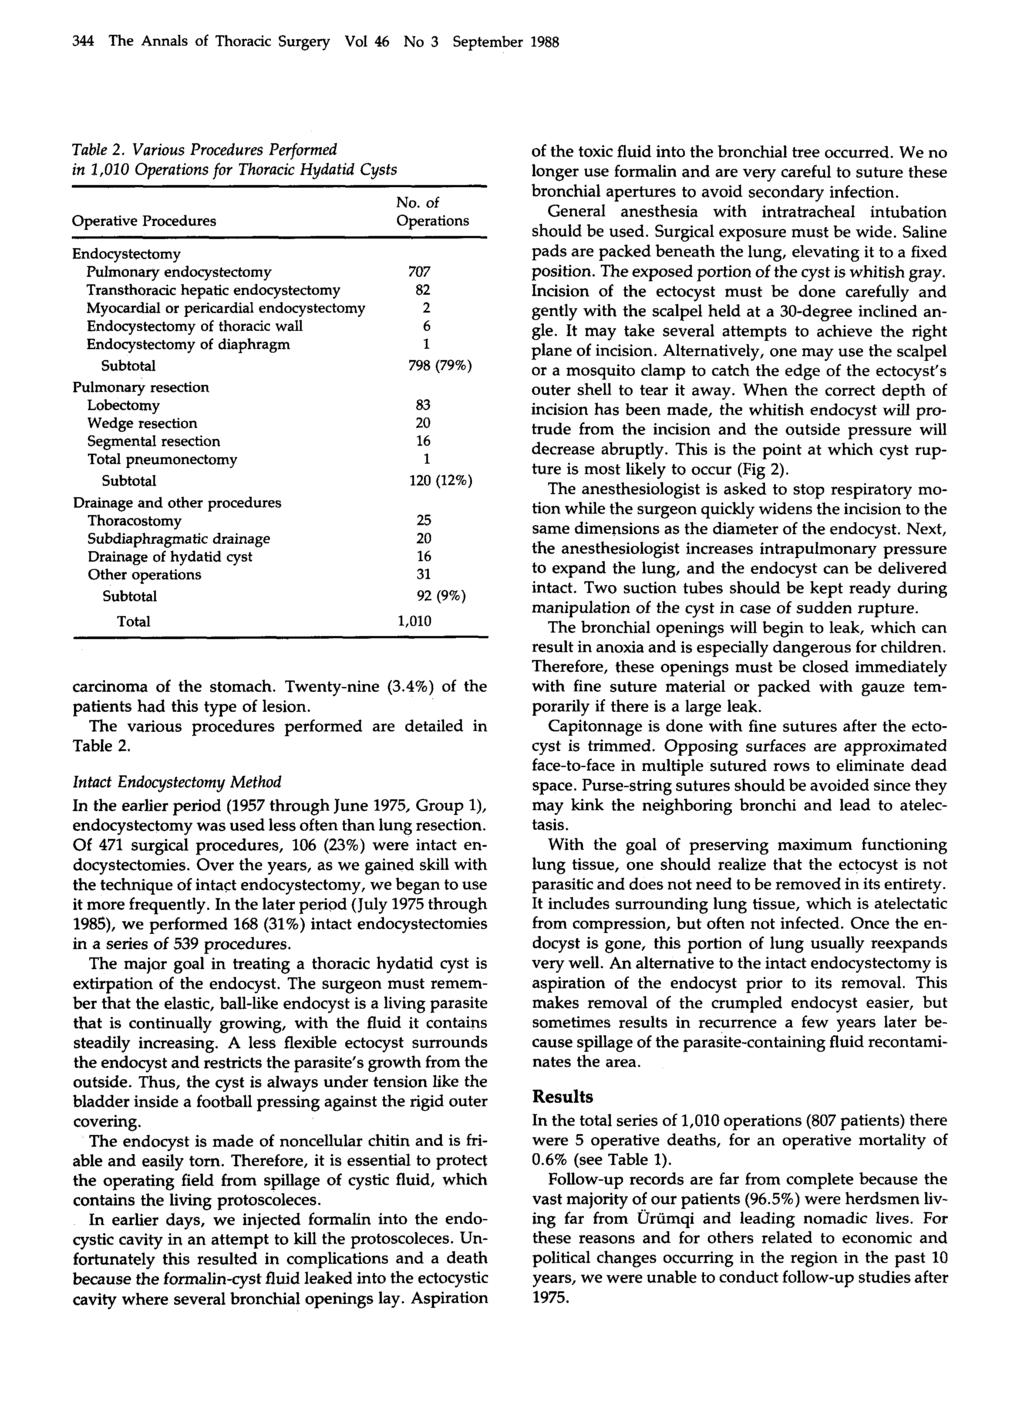 344 The Annals of Thoracic Surgery Vol 46 No 3 September 1988 Table 2. Various Procedures Performed in 1,010 Operations for Thoracic Hydatid Cysts Operative Procedures No.